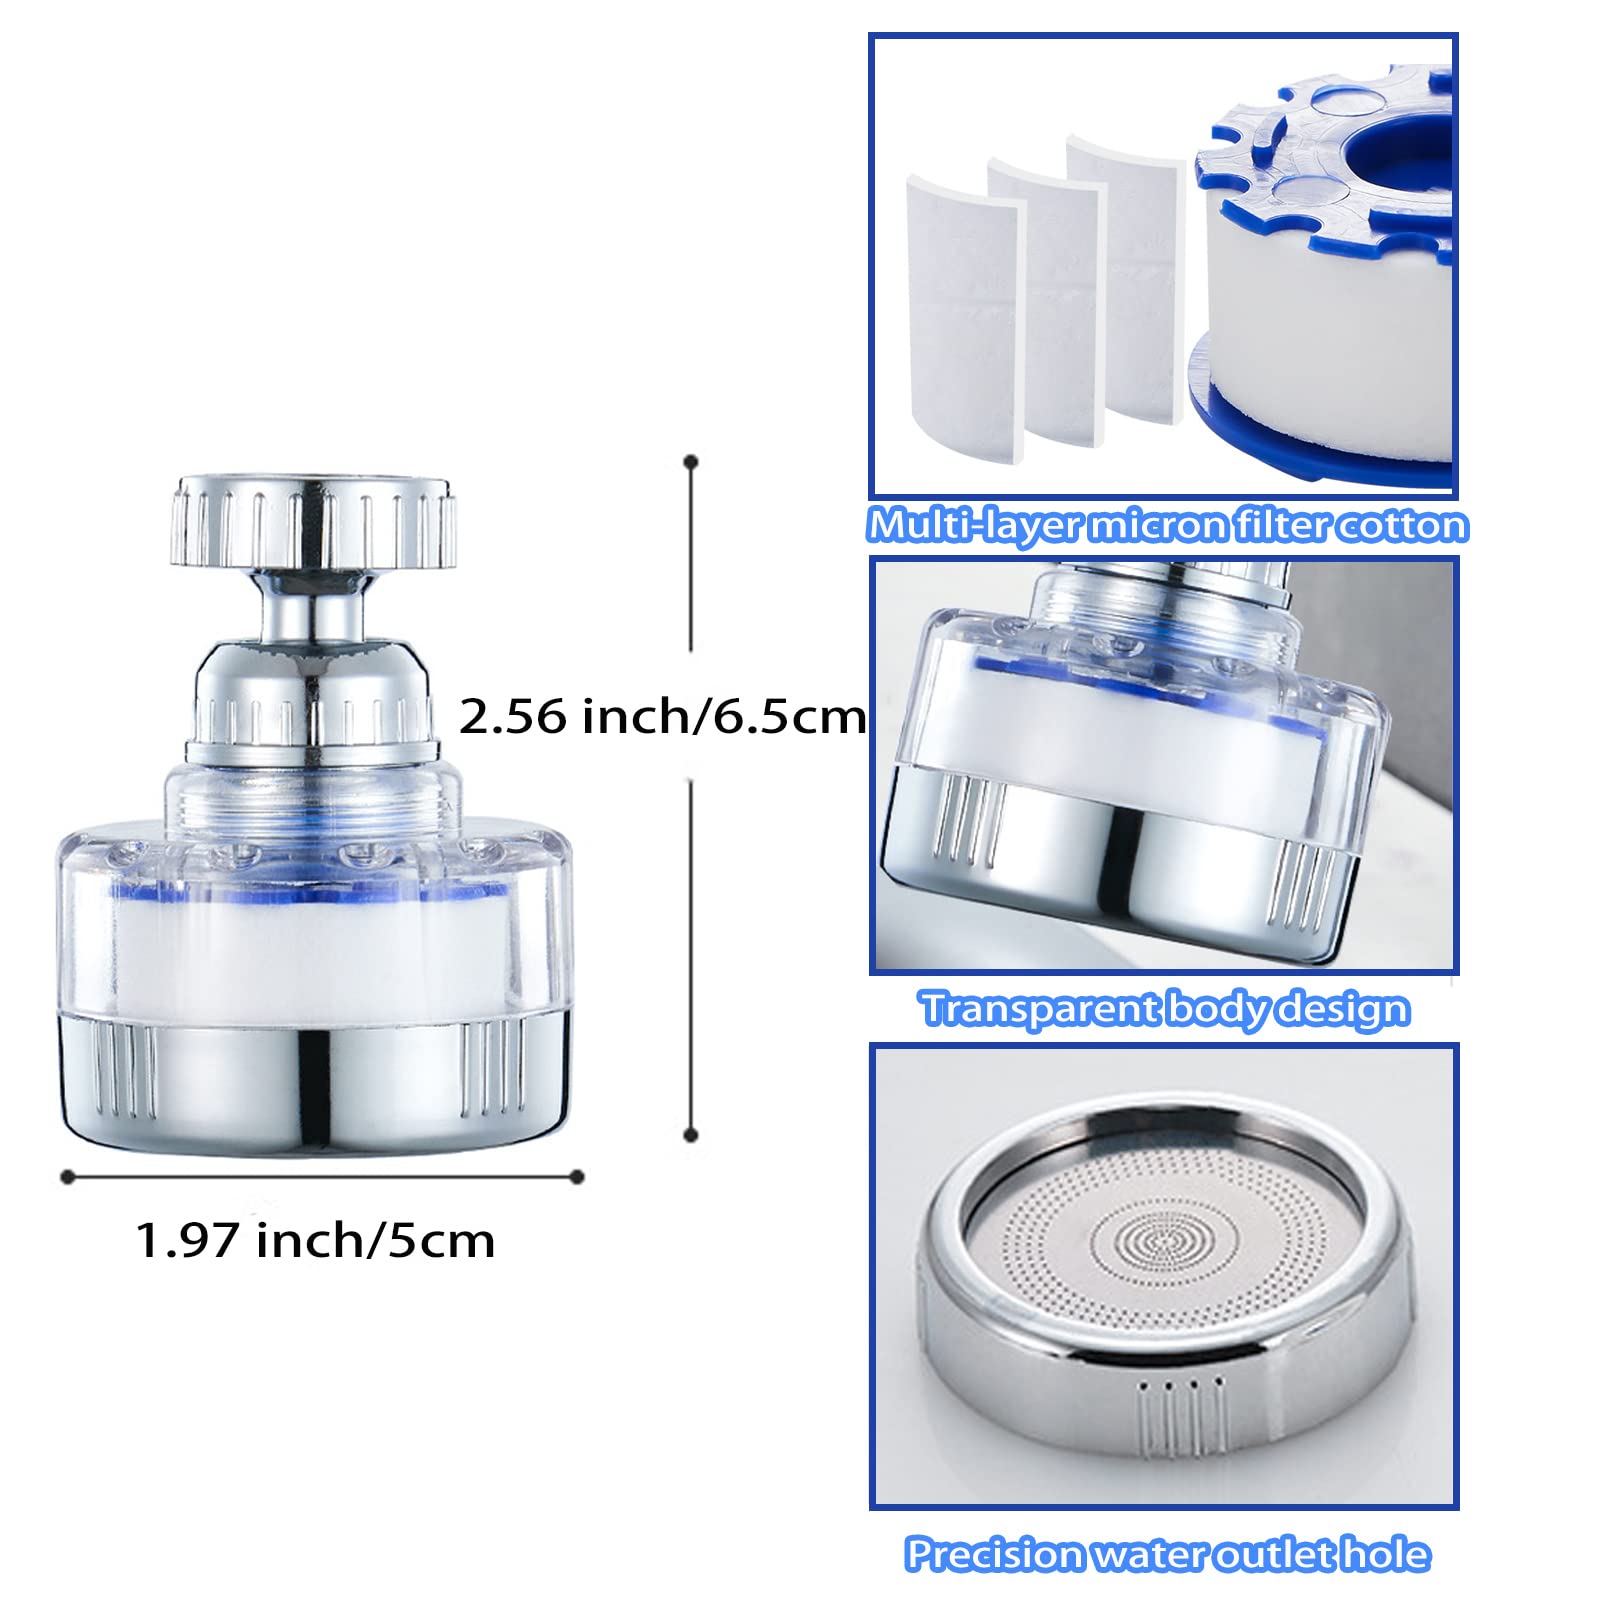 360° Rotating Bathroom Faucet Filter Sink Faucet Purifier Remove Heavy Metals and Hard Water, Sink Water Faucet Filter for Kitchen and Bathroom, Water Purifier for Sink